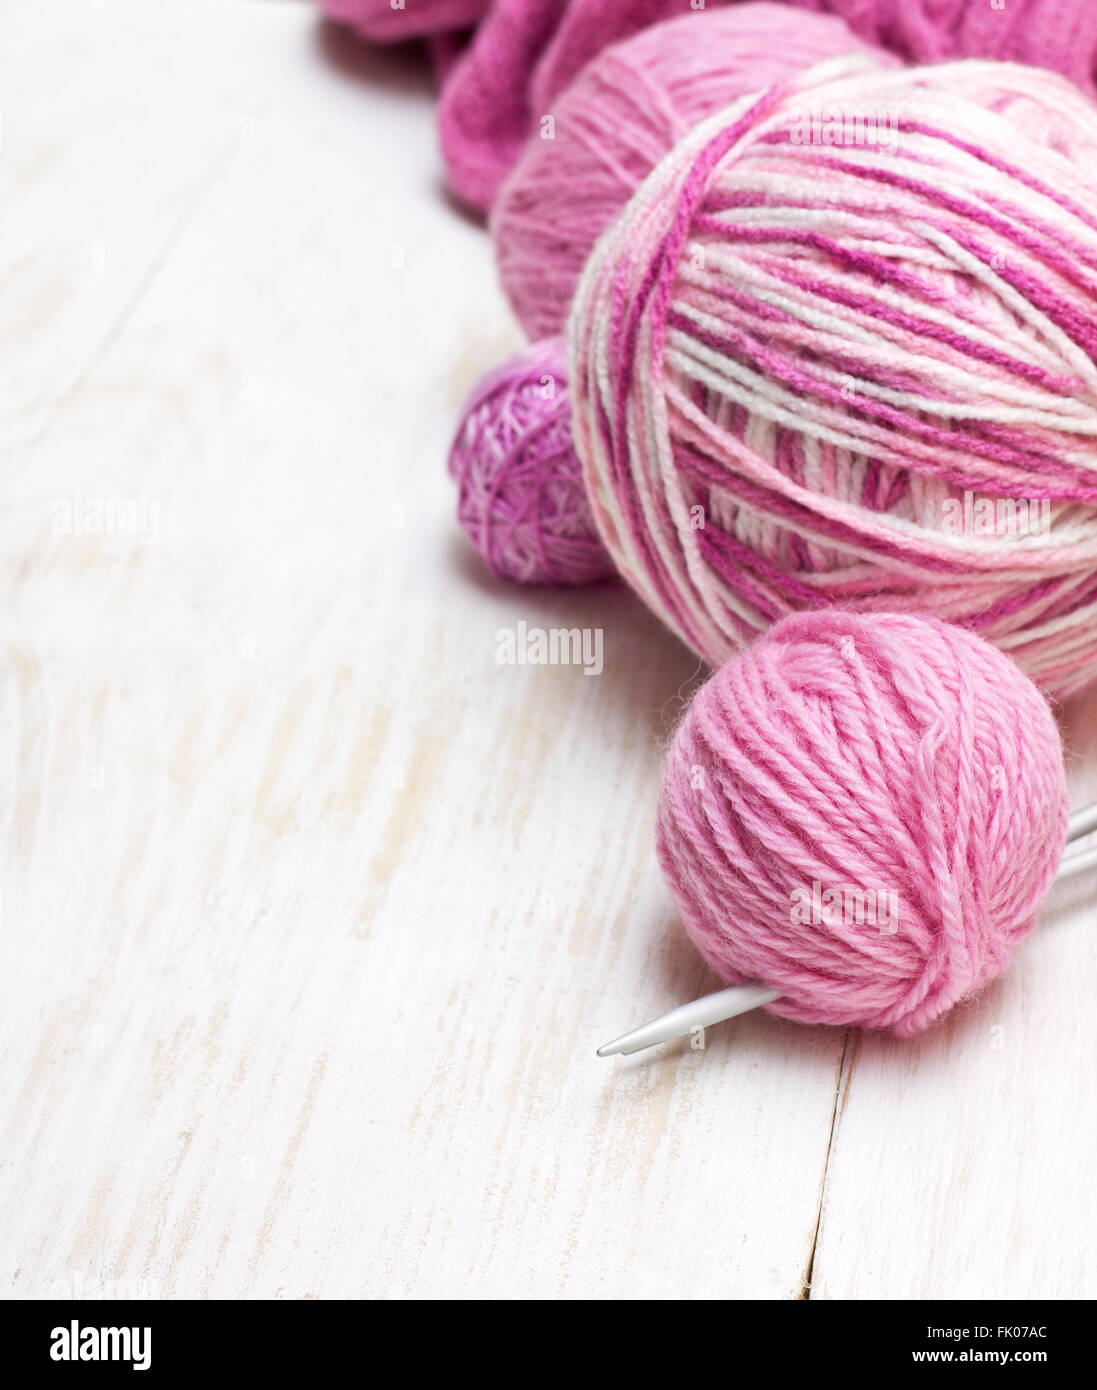 balls of pink yarn on a wooden background Stock Photo